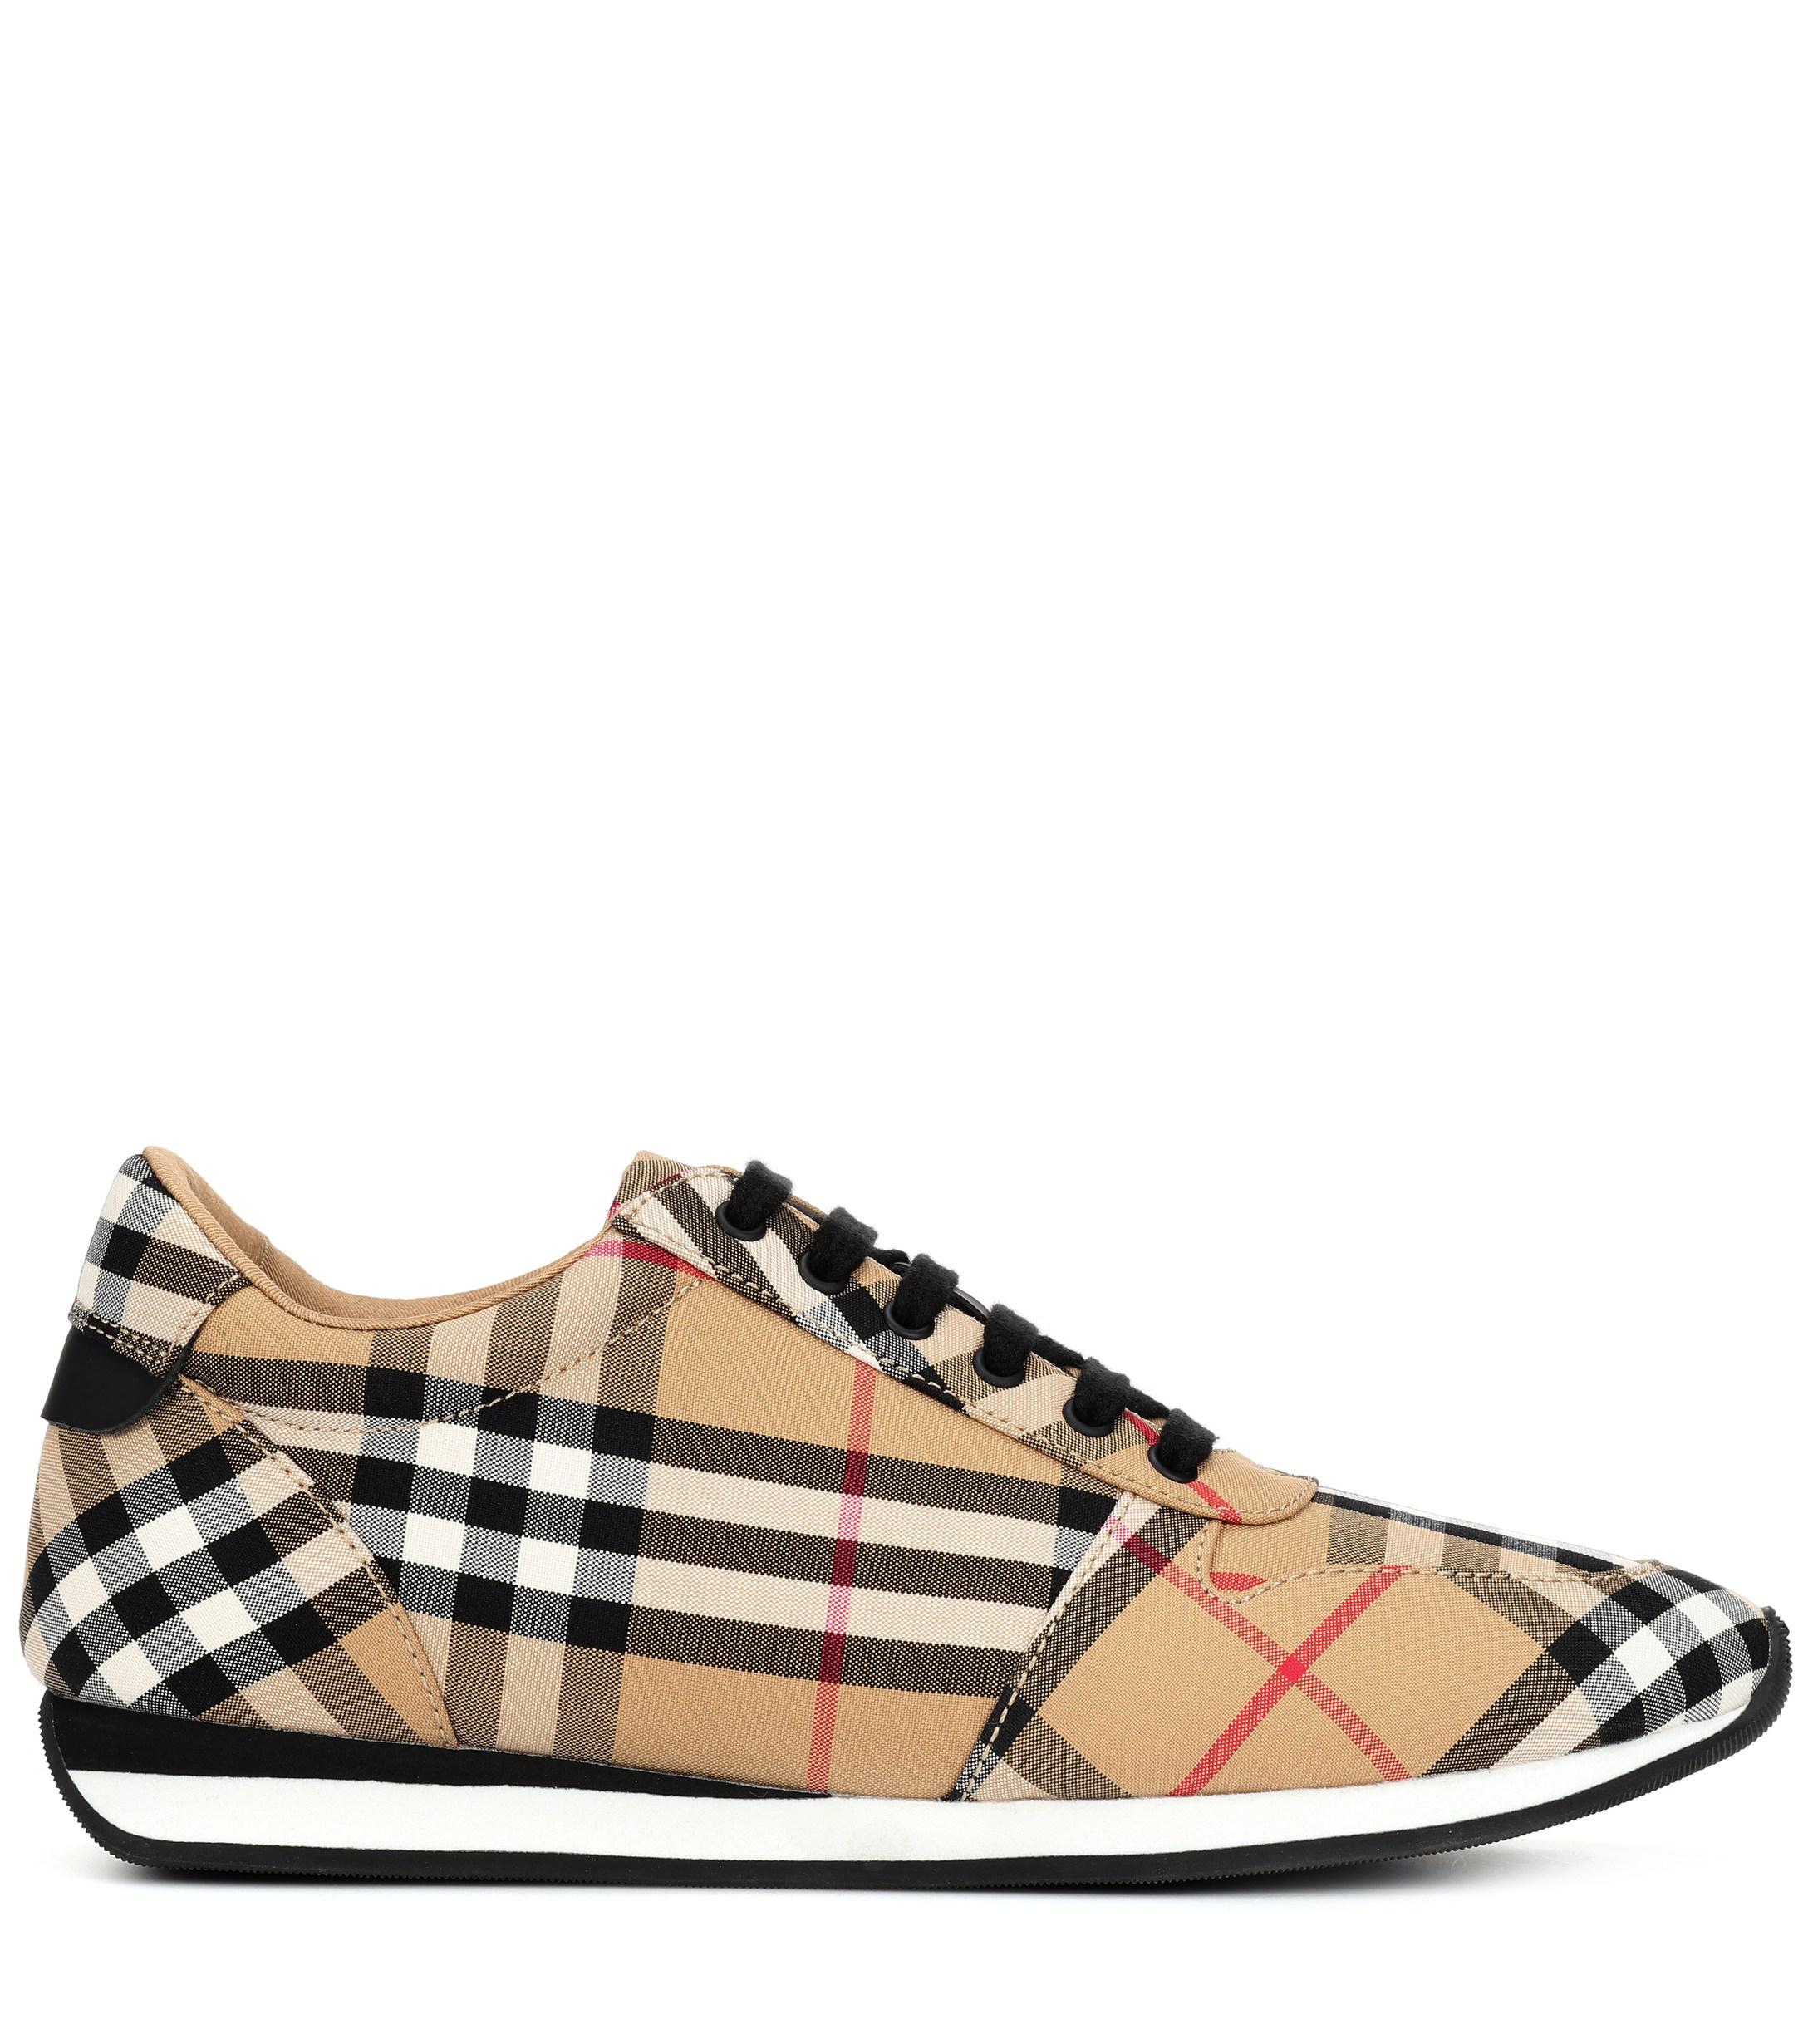 Burberry Leather Amelia Check Sneakers 